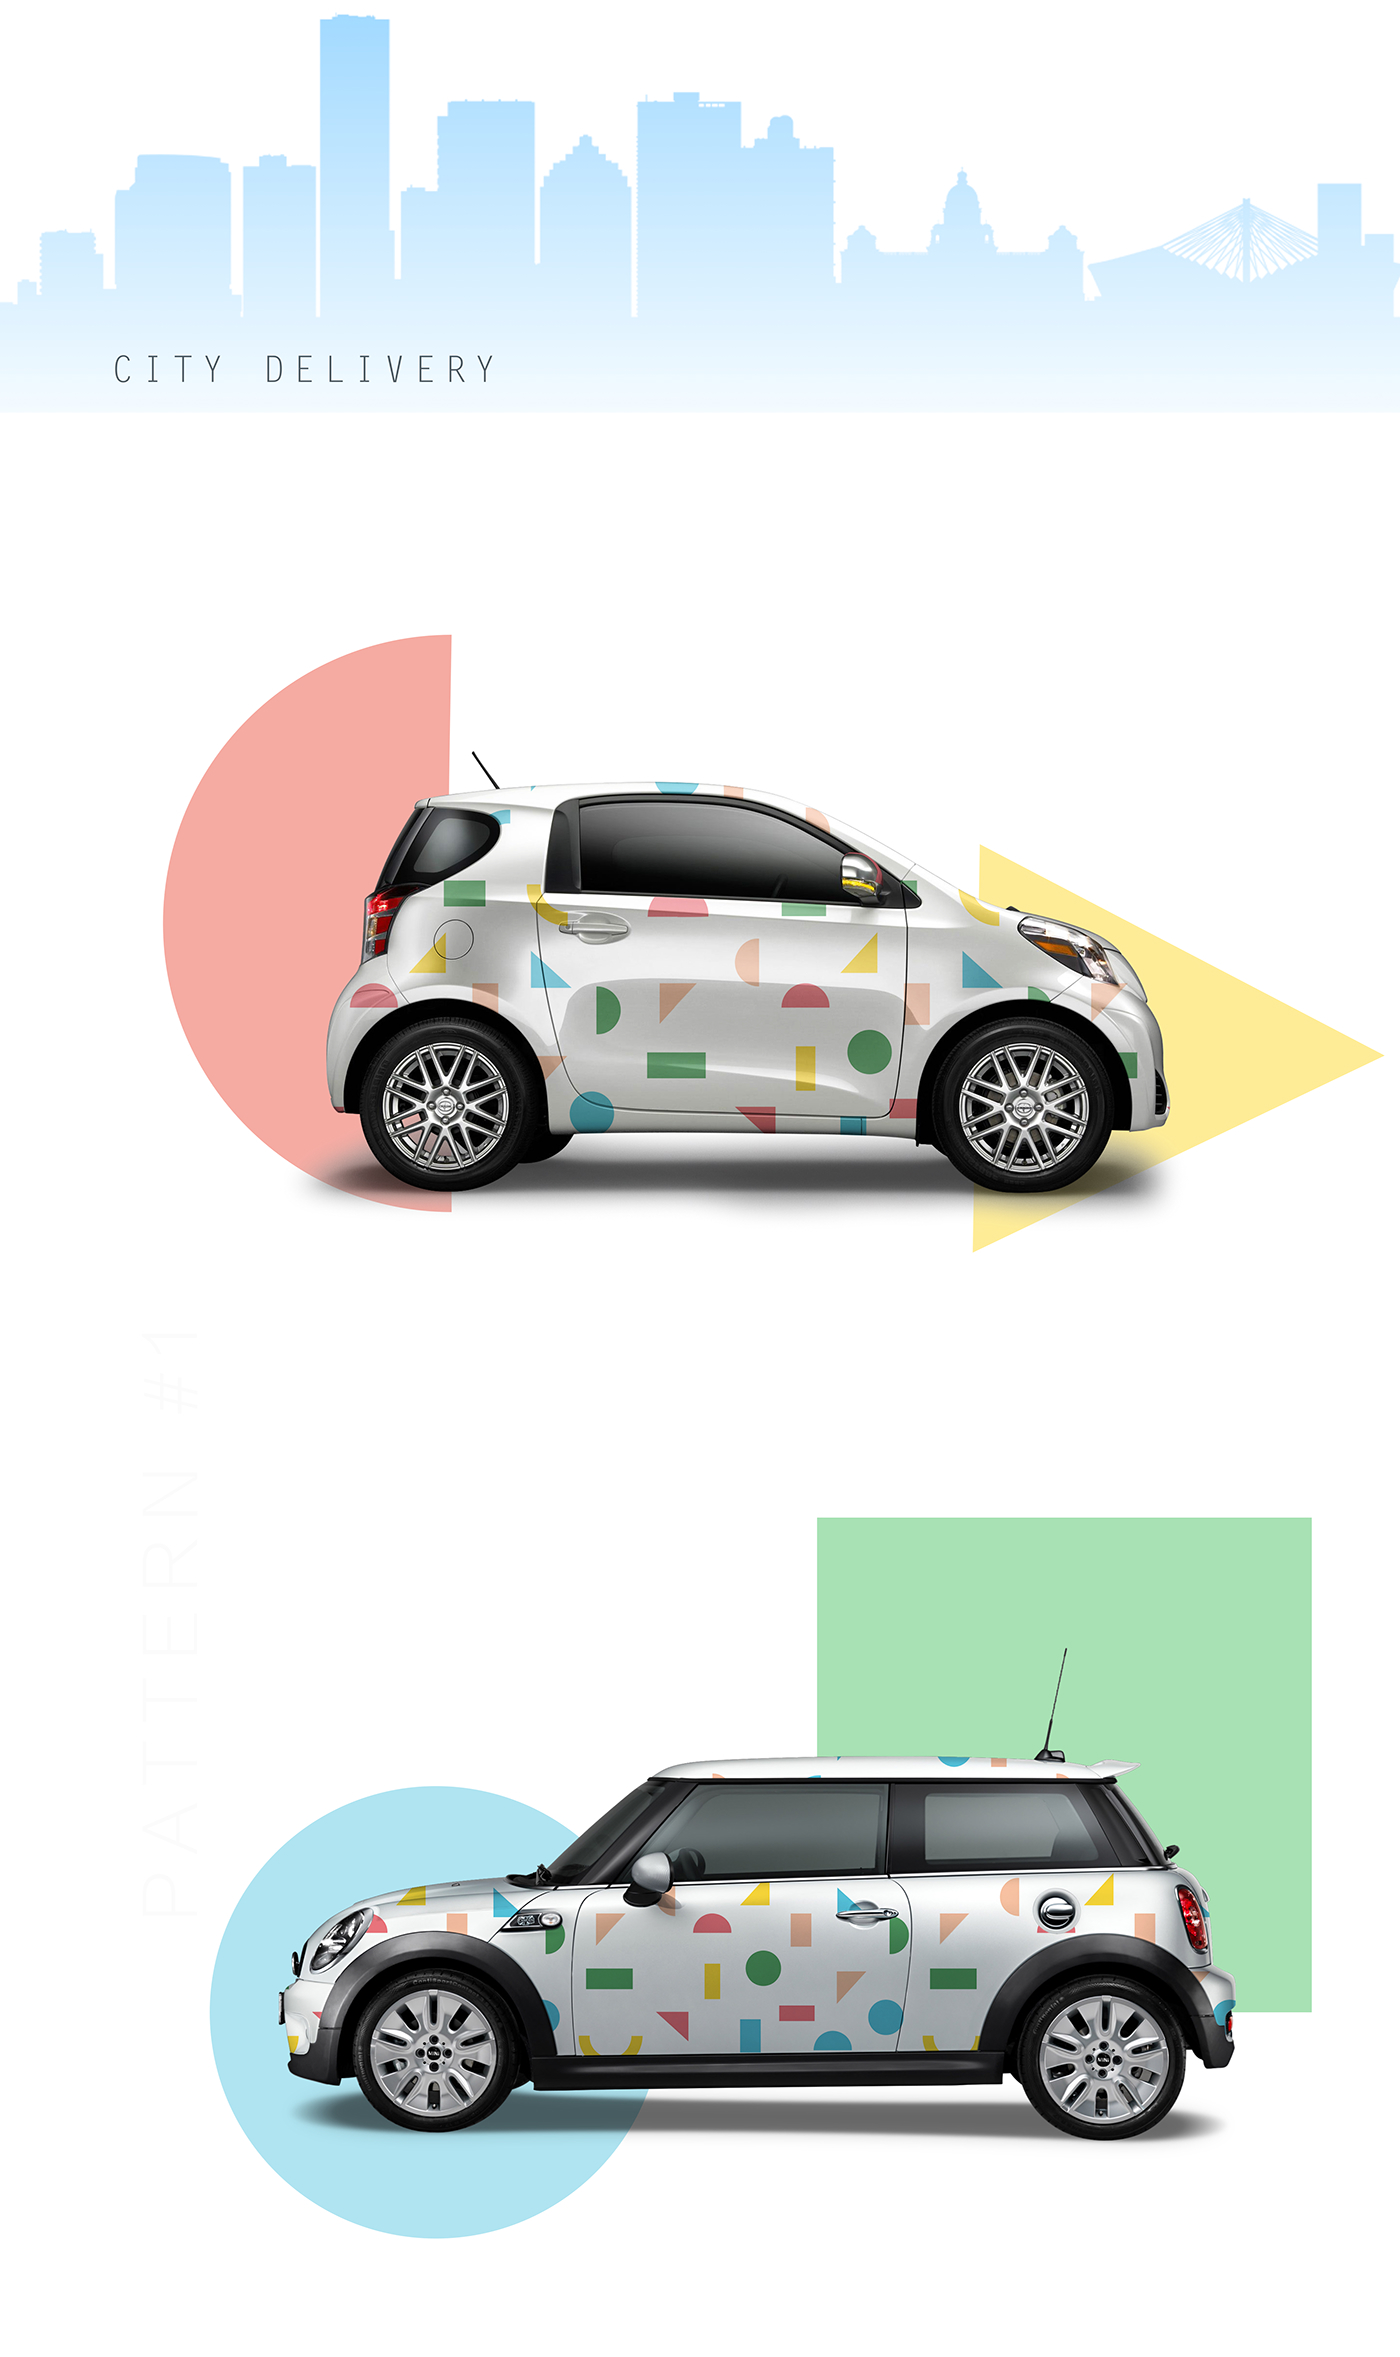 brand pattern Form ikea design minimal car delivery White family